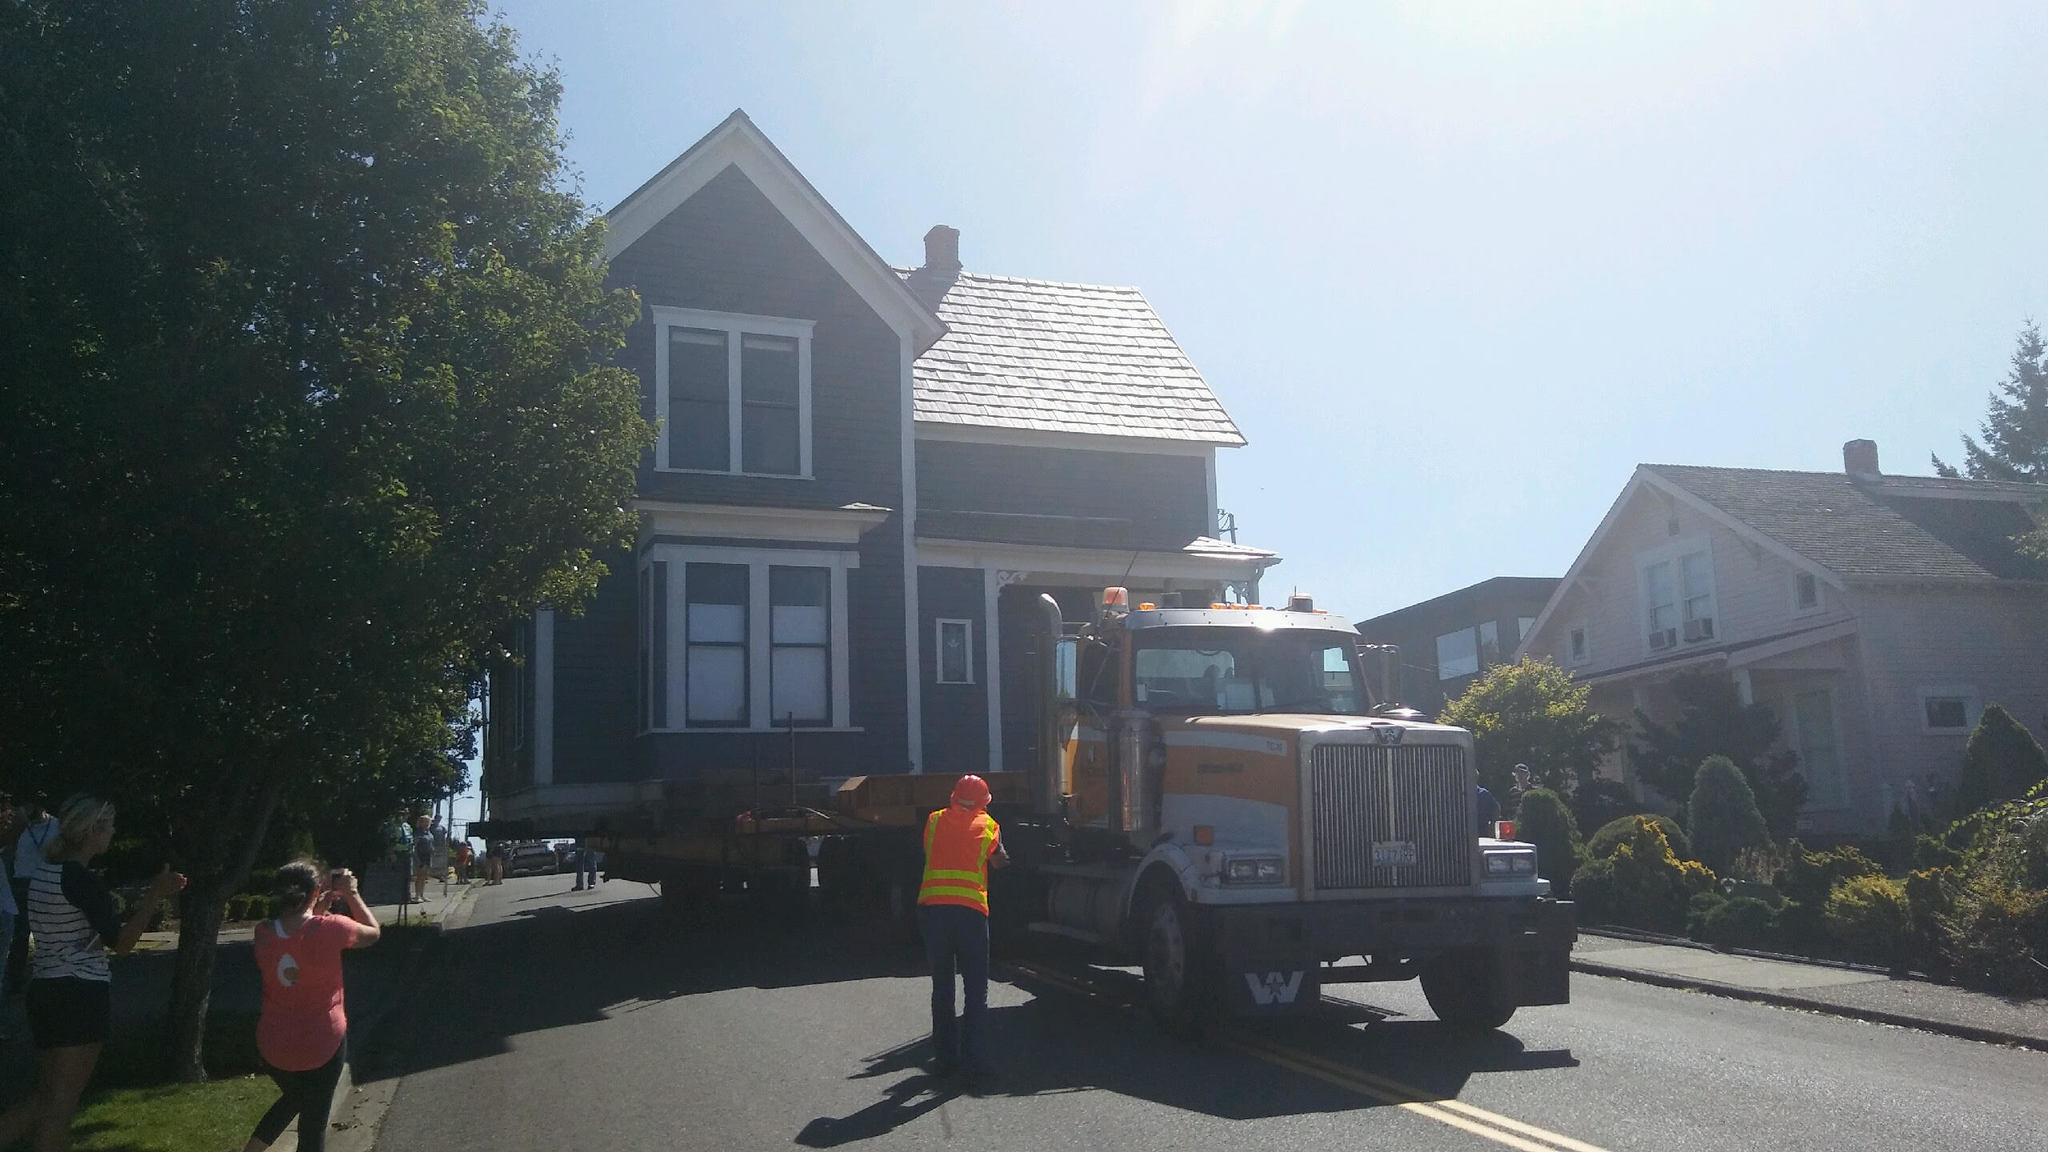 The Trueblood house was relocated from its historic location on Wednesday morning. AARON KUNKLER/Kirkland Reporter